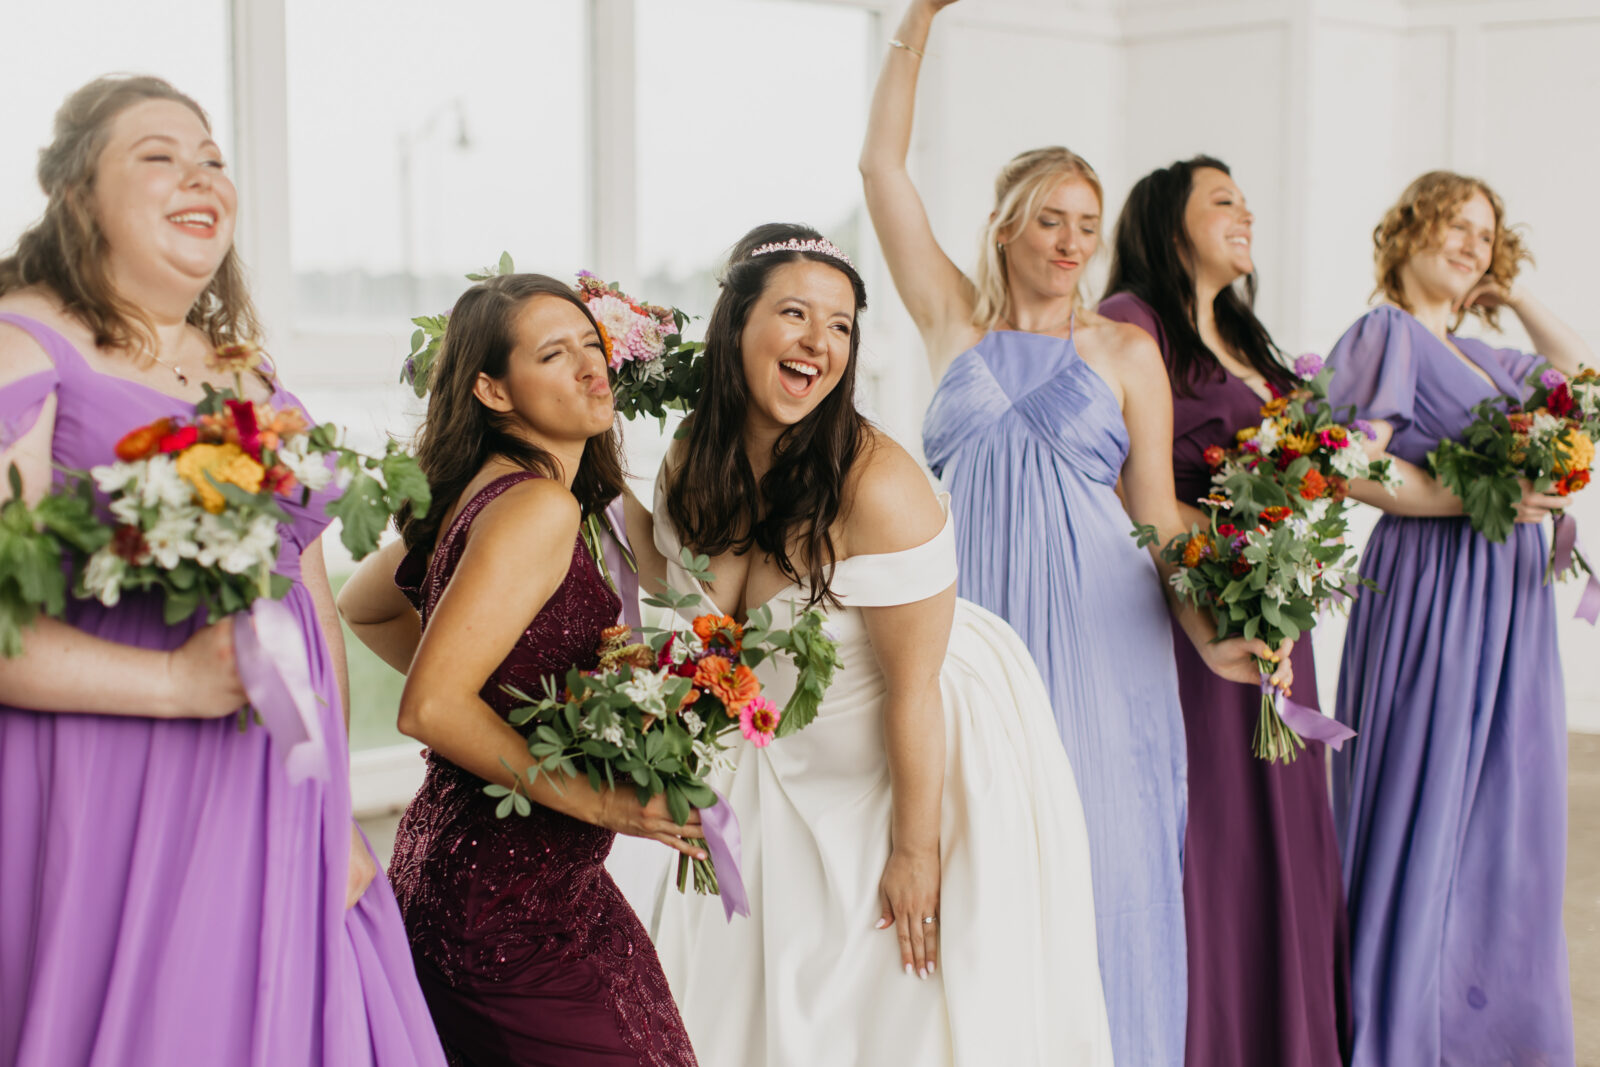 Photo of the lovely bride with her bridesmaids